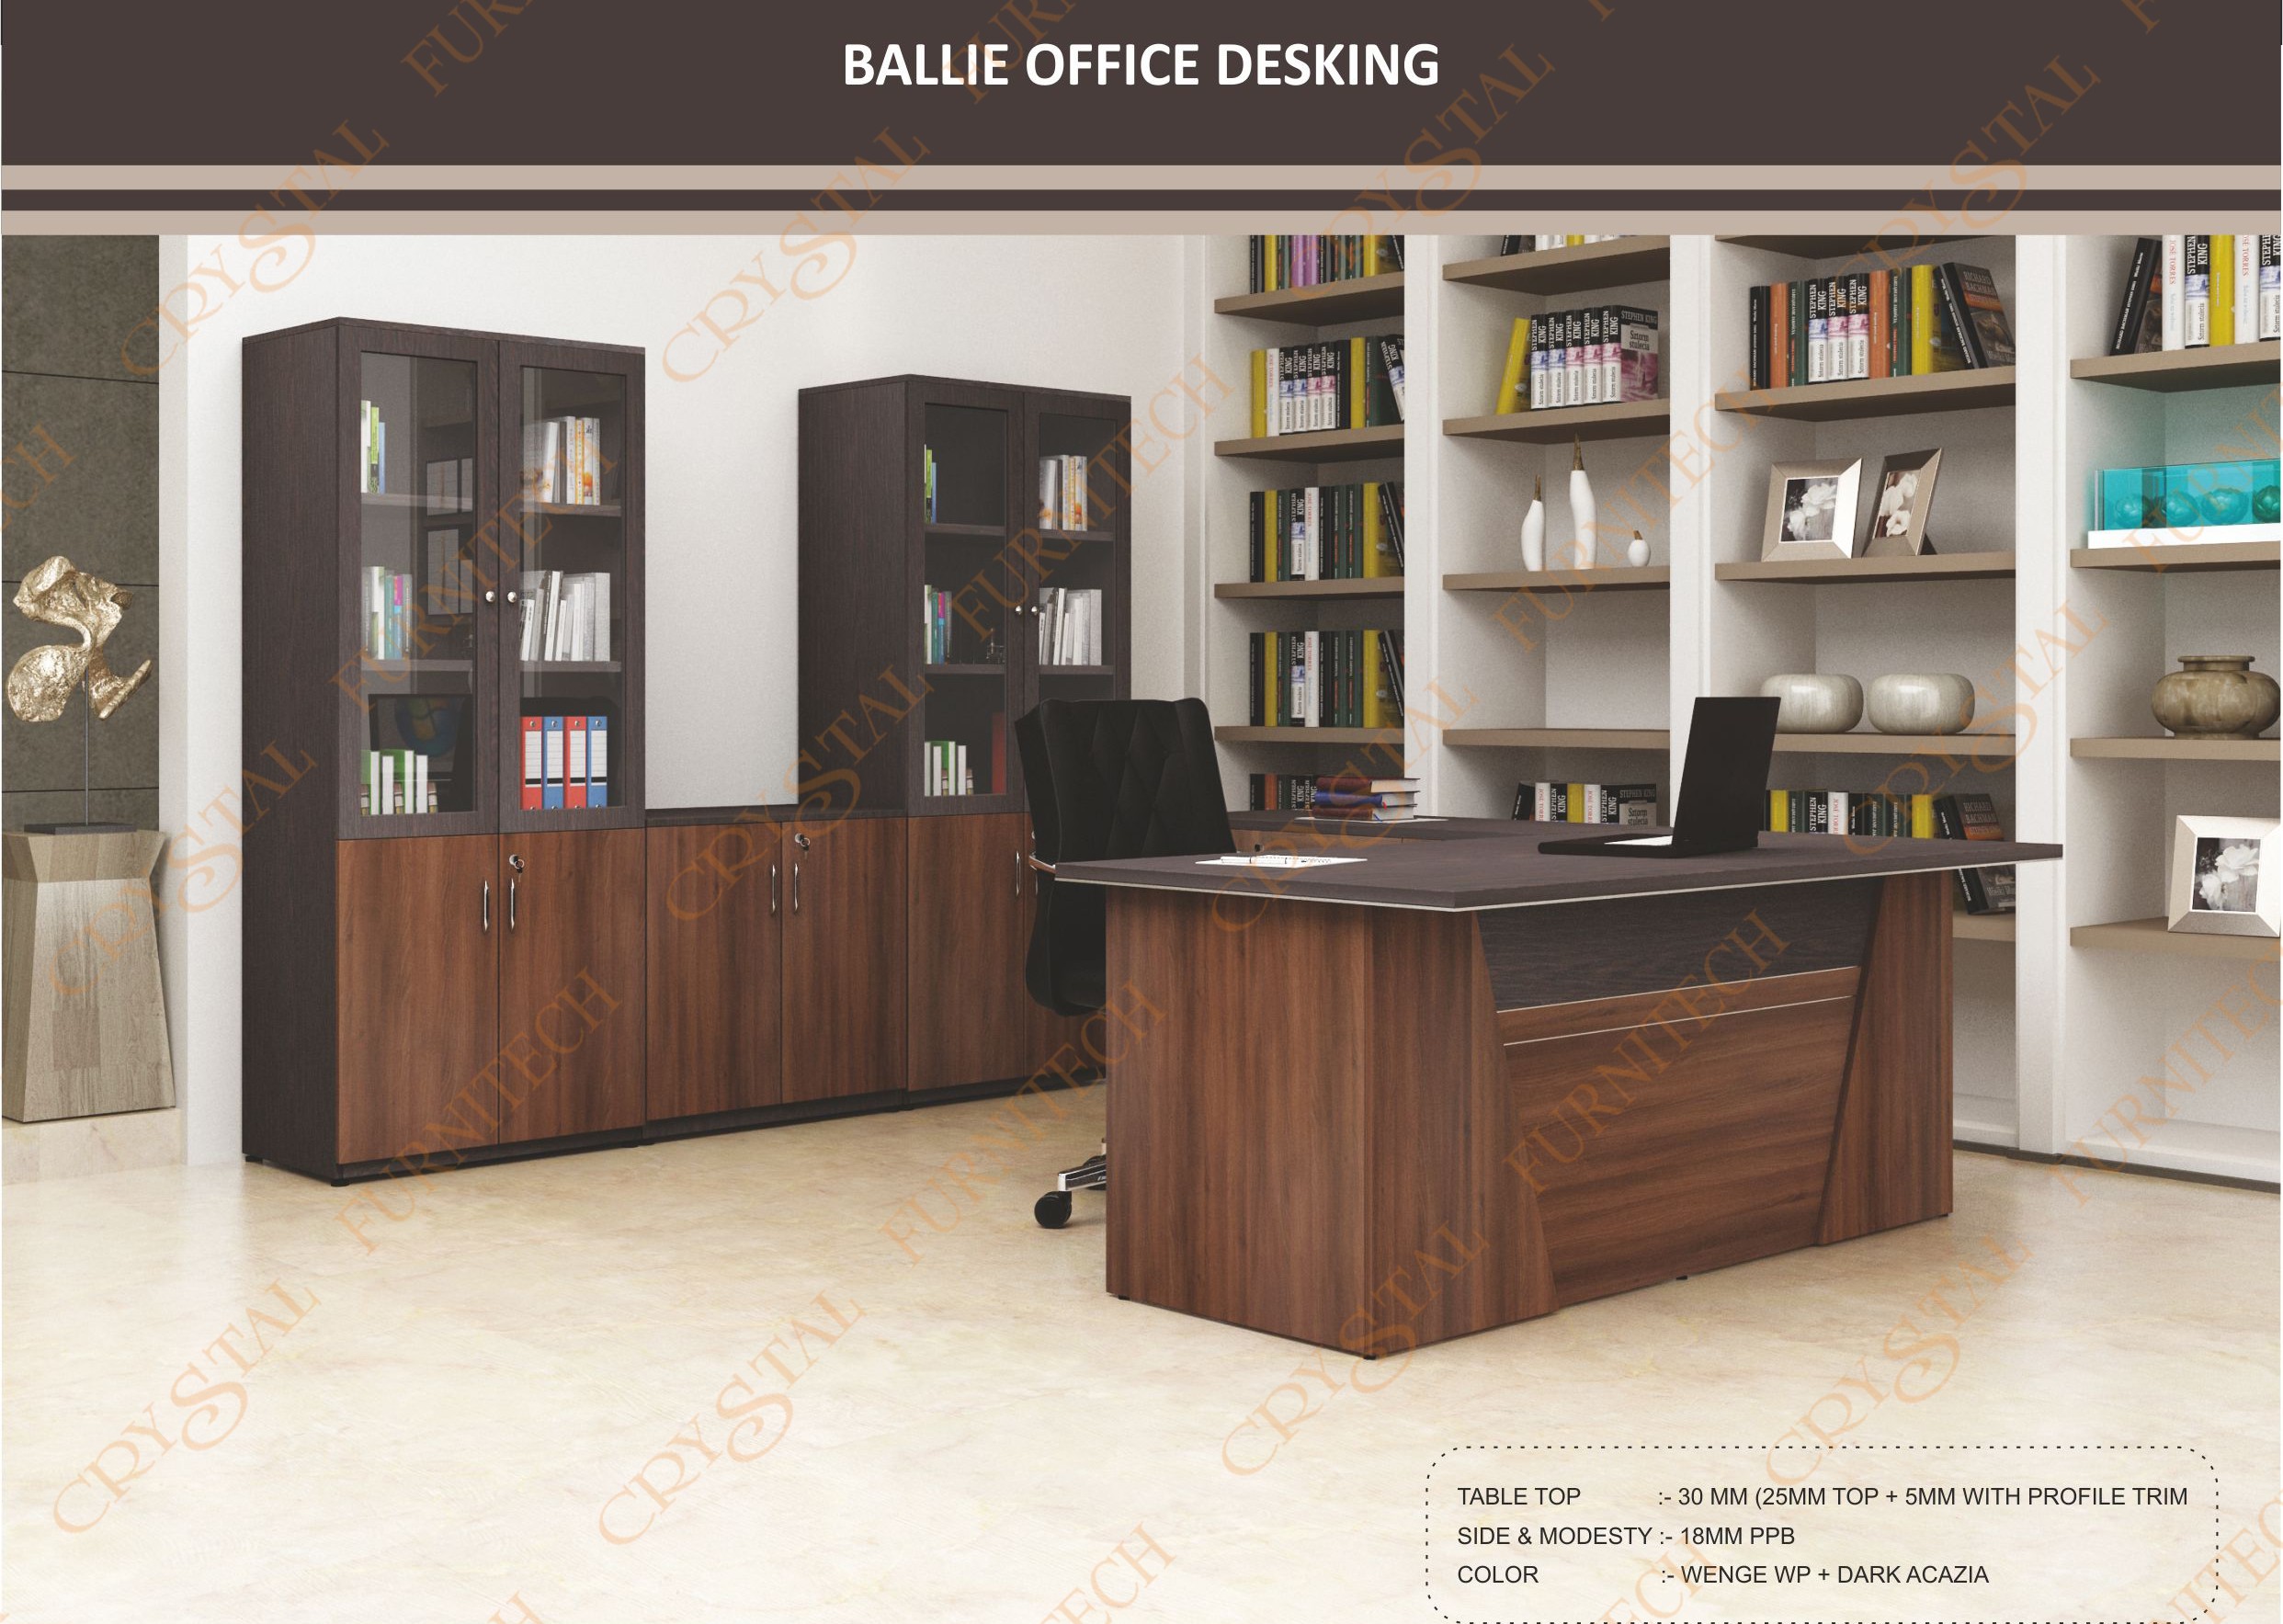 images/products/Office-Furniture-Ballie-Office-Desking_1657084786.jpg